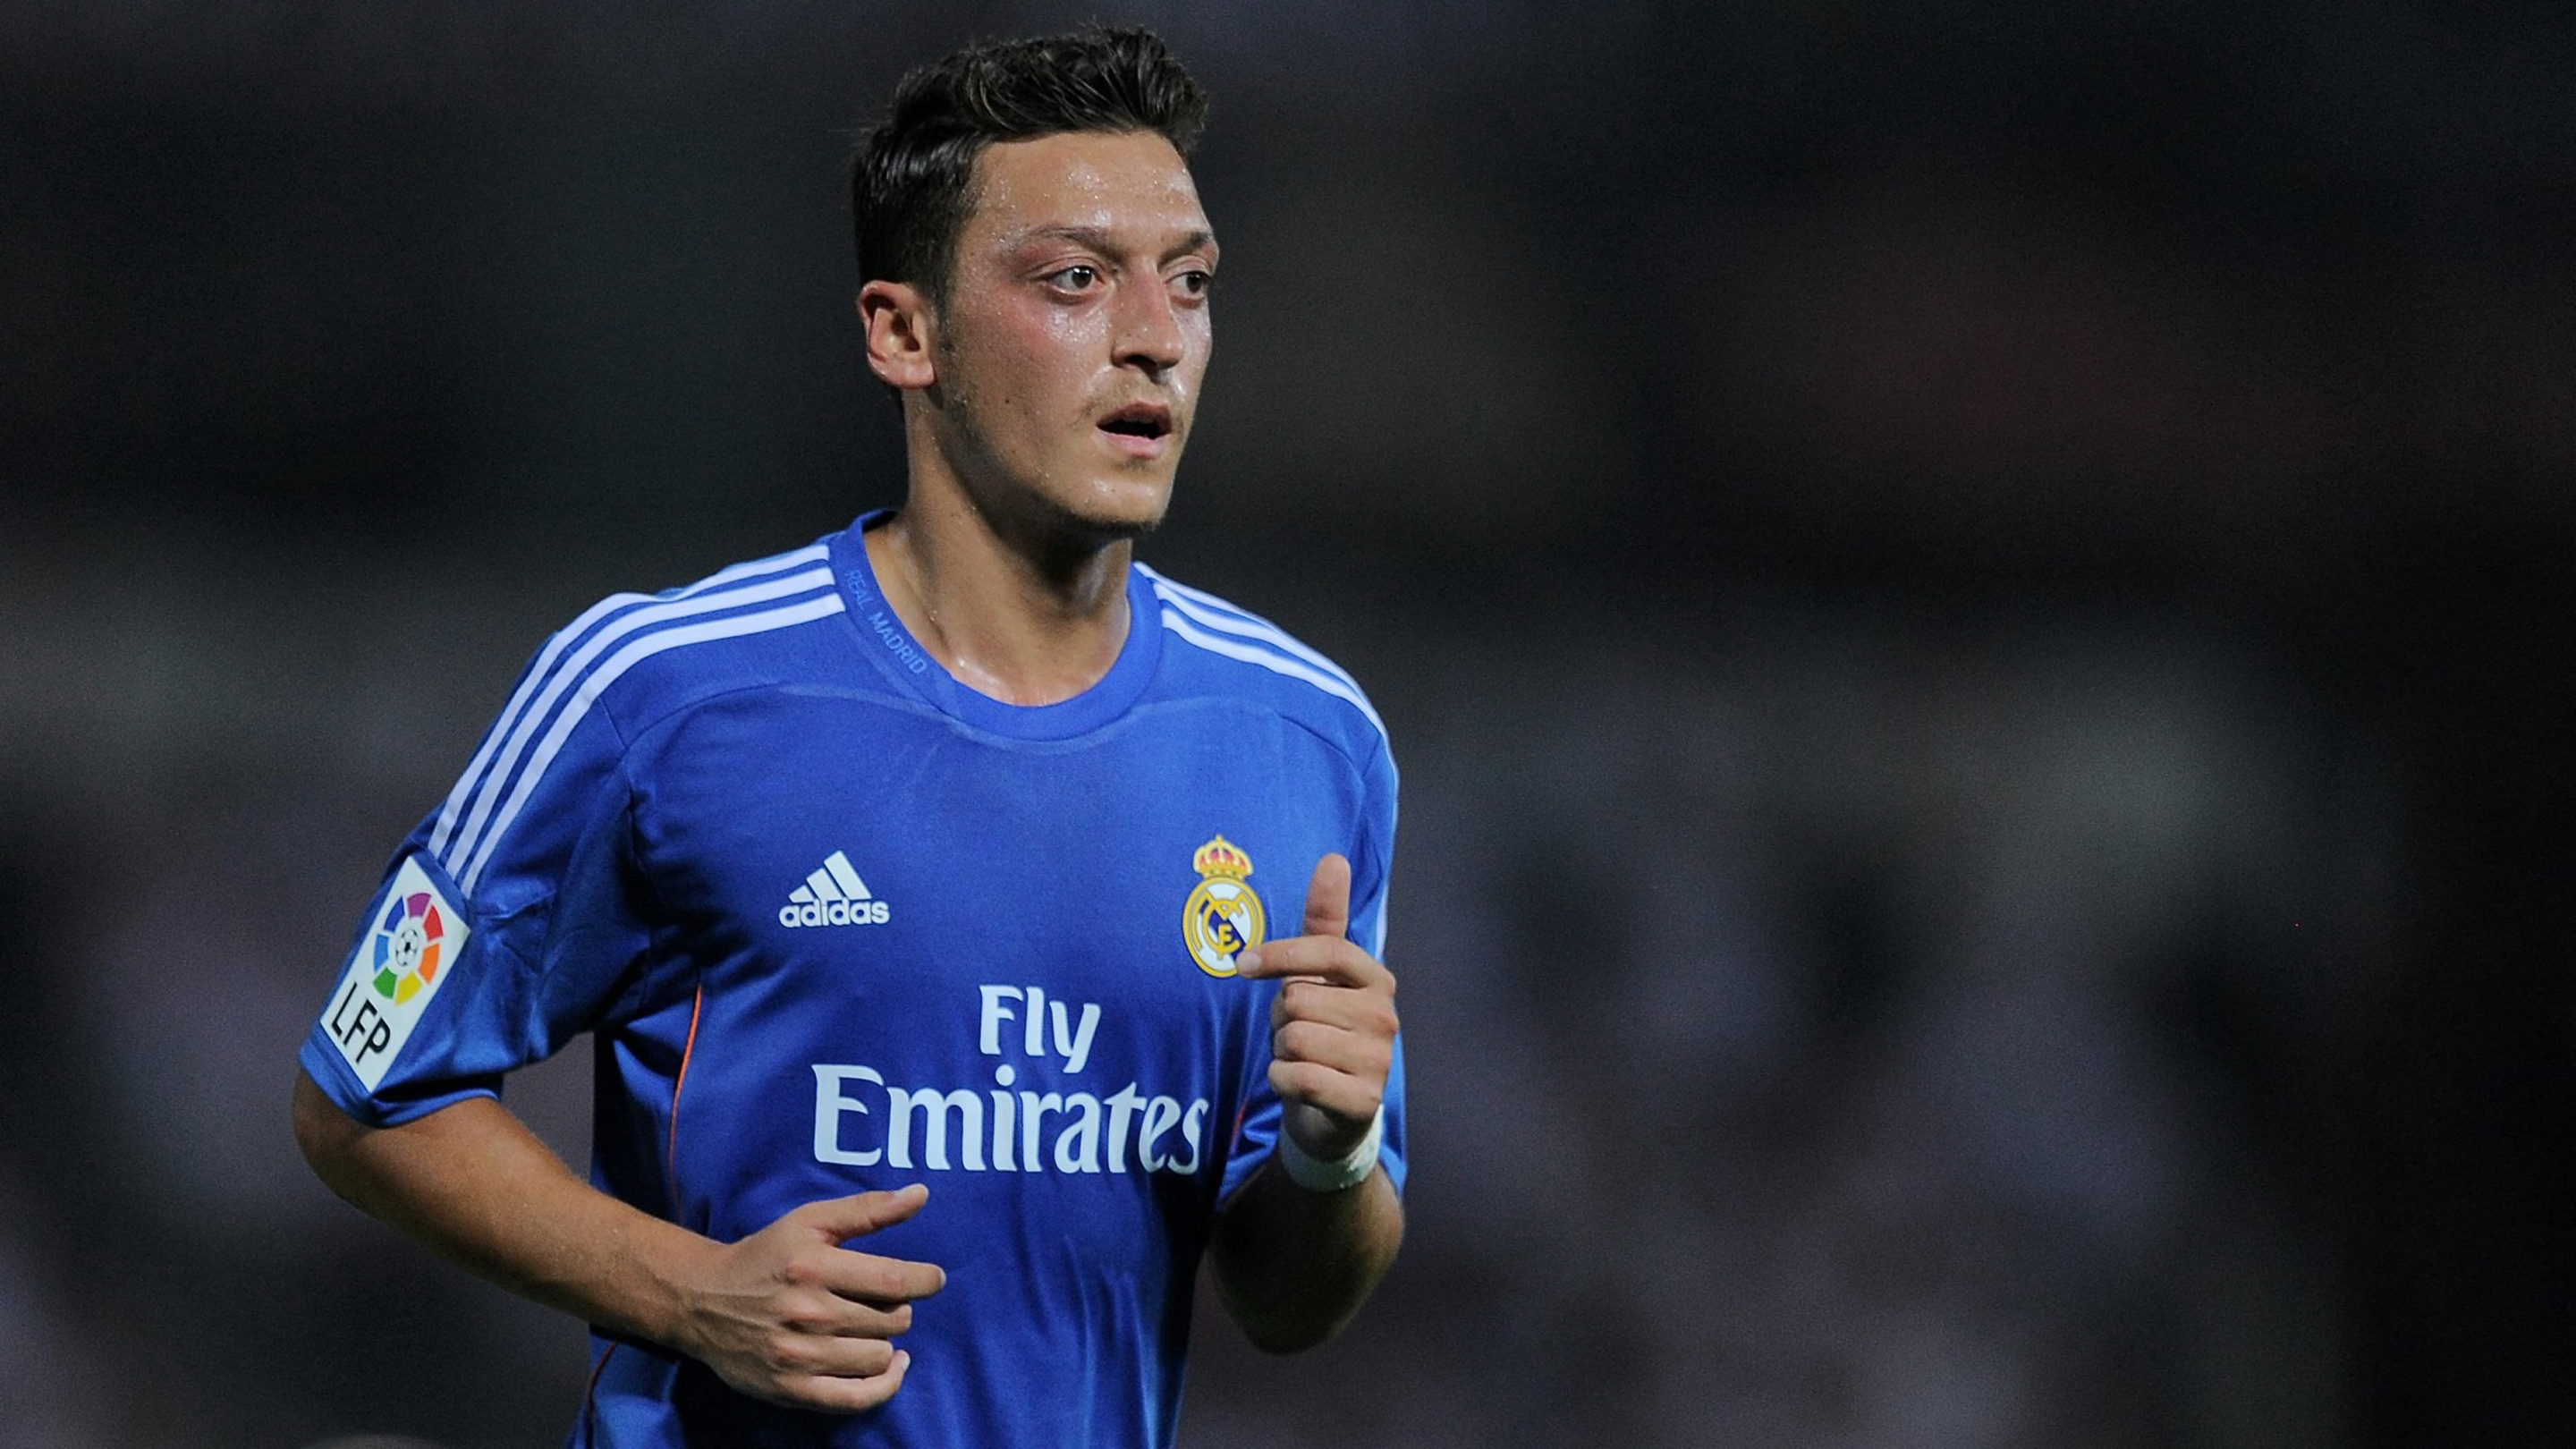 Mesut Ozil names Real Madrid star who could win Ballon d'Or